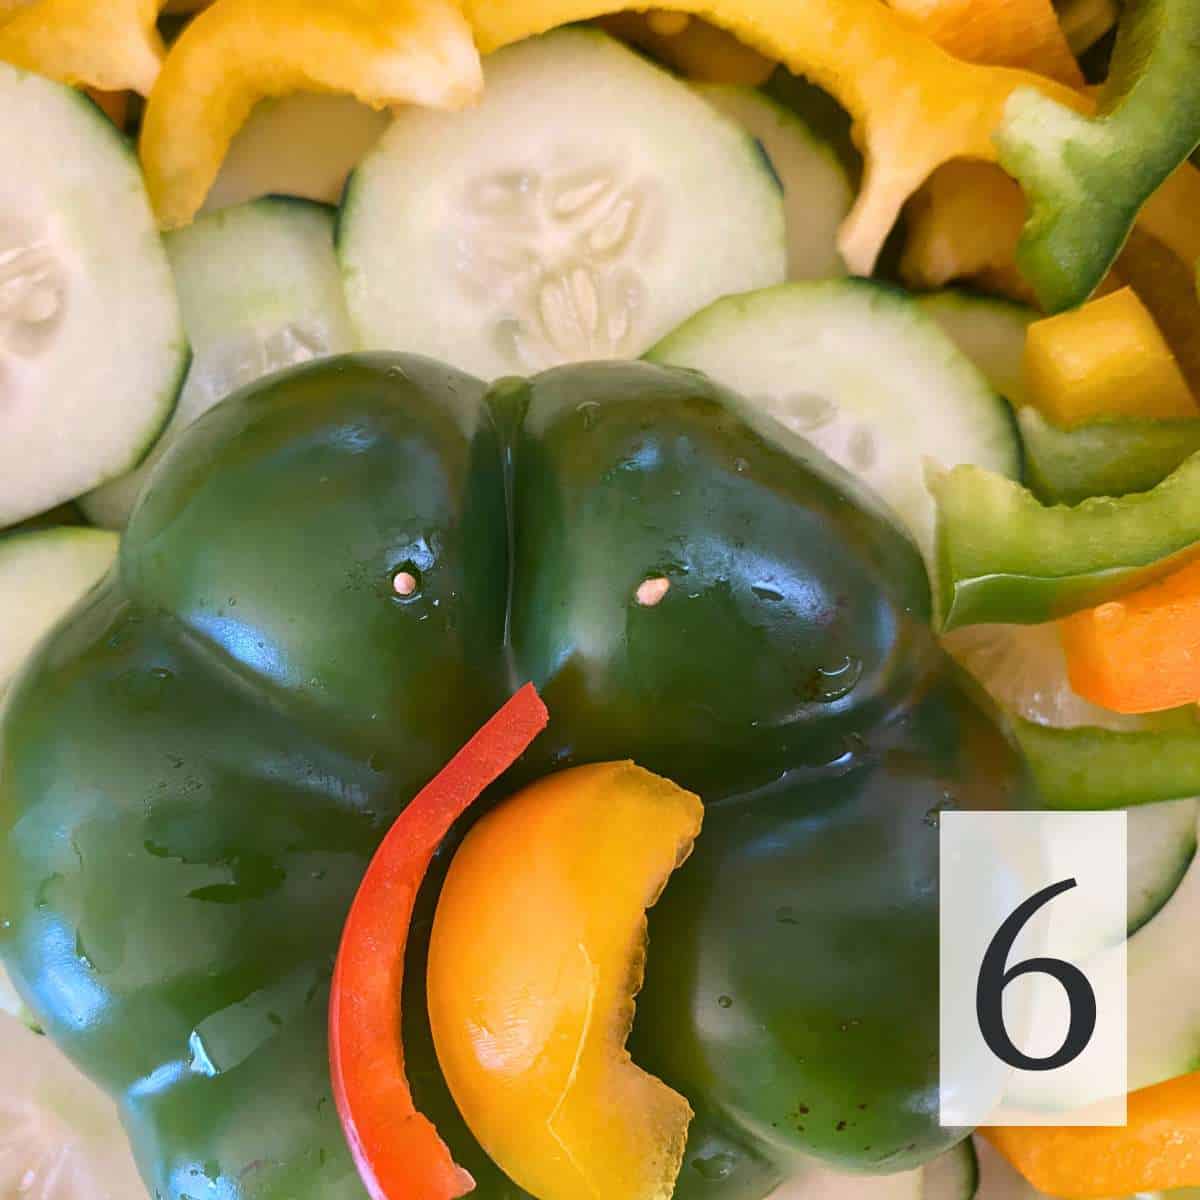 The end of a bell pepper forming the face of the turkey with a red pepper snood and yellow pepper nose and toothpicks to hold the eyes.